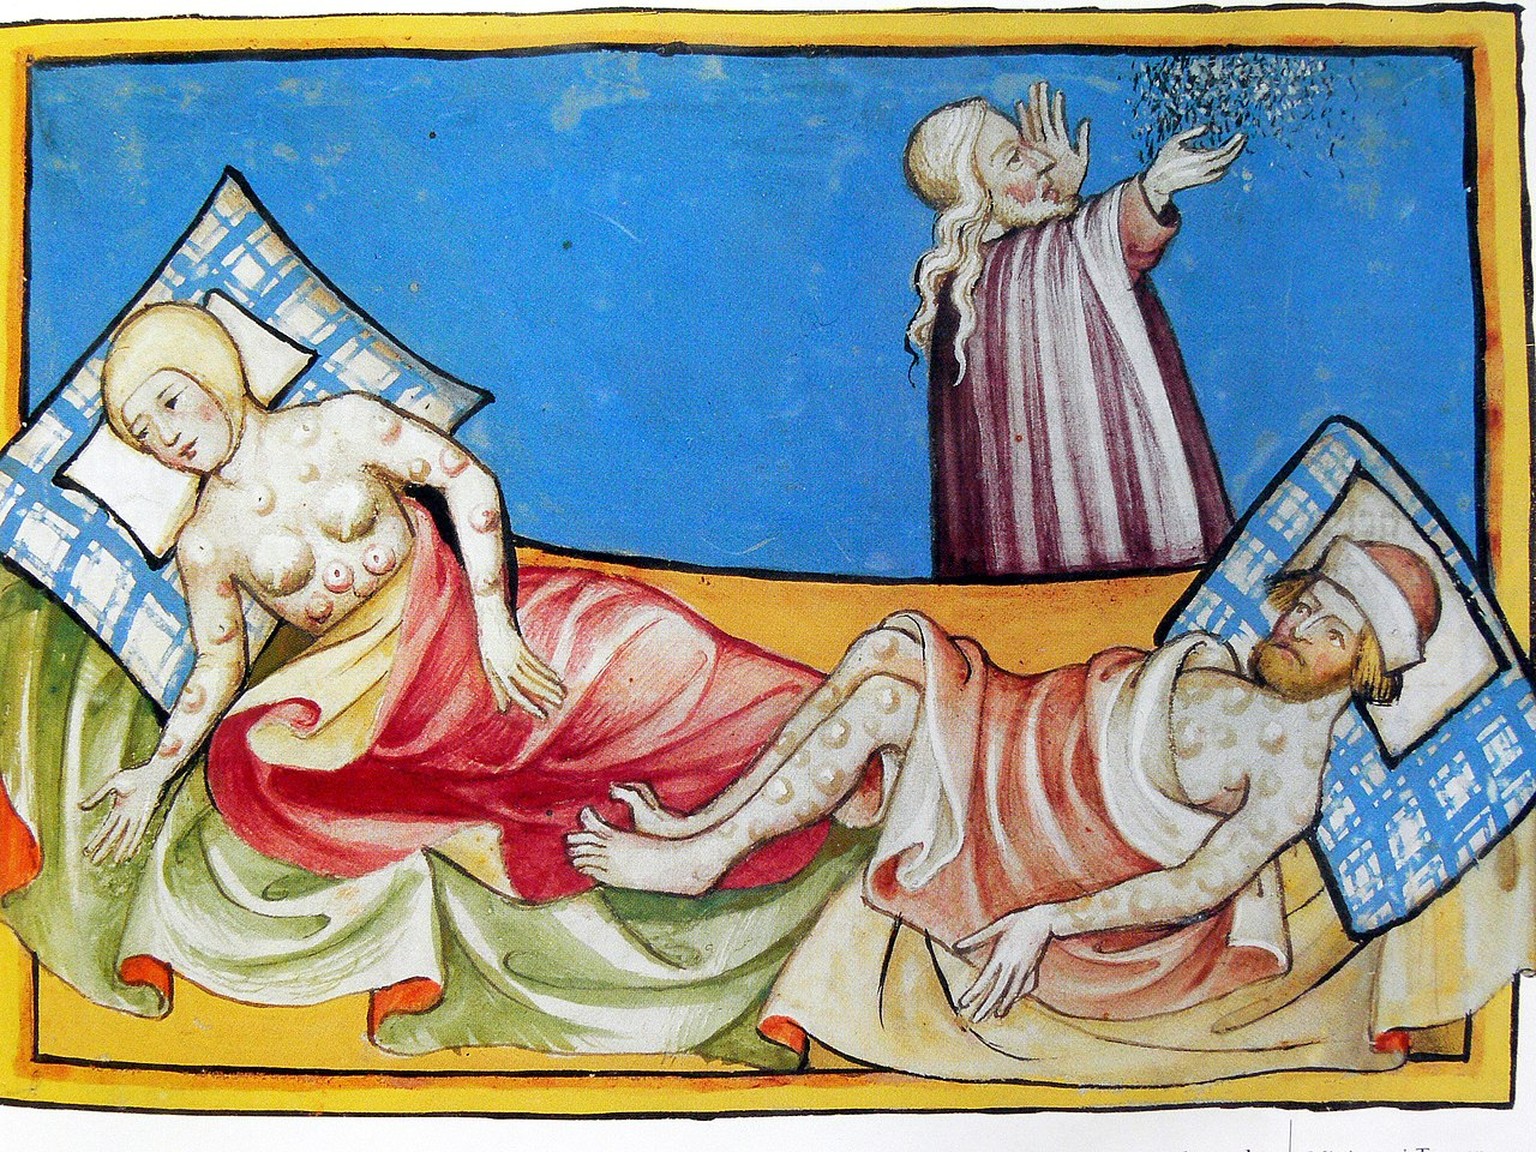 Miniatur aus der Toggenburg-Bibel (Schweiz) von 1411.
The image depicts Moses in the background with two people suffering from the Biblical plague of boils described in Exodus 9:8-9. 
https://commons. ...